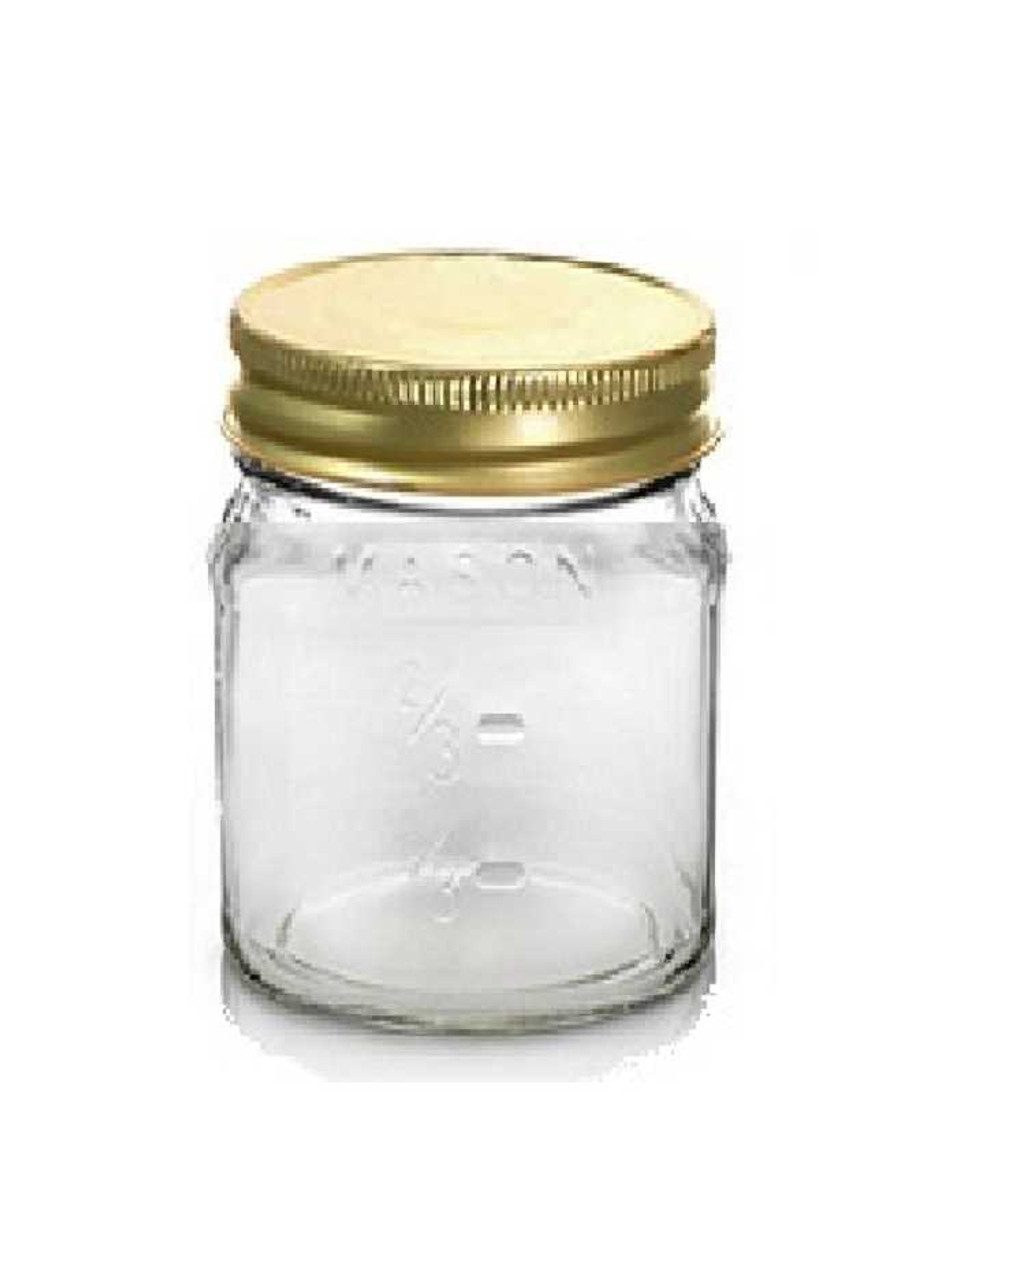 https://cdn11.bigcommerce.com/s-1ybtx/images/stencil/1280x1280/products/1087/6358/8-oz-Square-Mason-Glass-Jars-with-Measurement-13-cup-23-cup_3444__67684.1699988765.jpg?c=2?imbypass=on